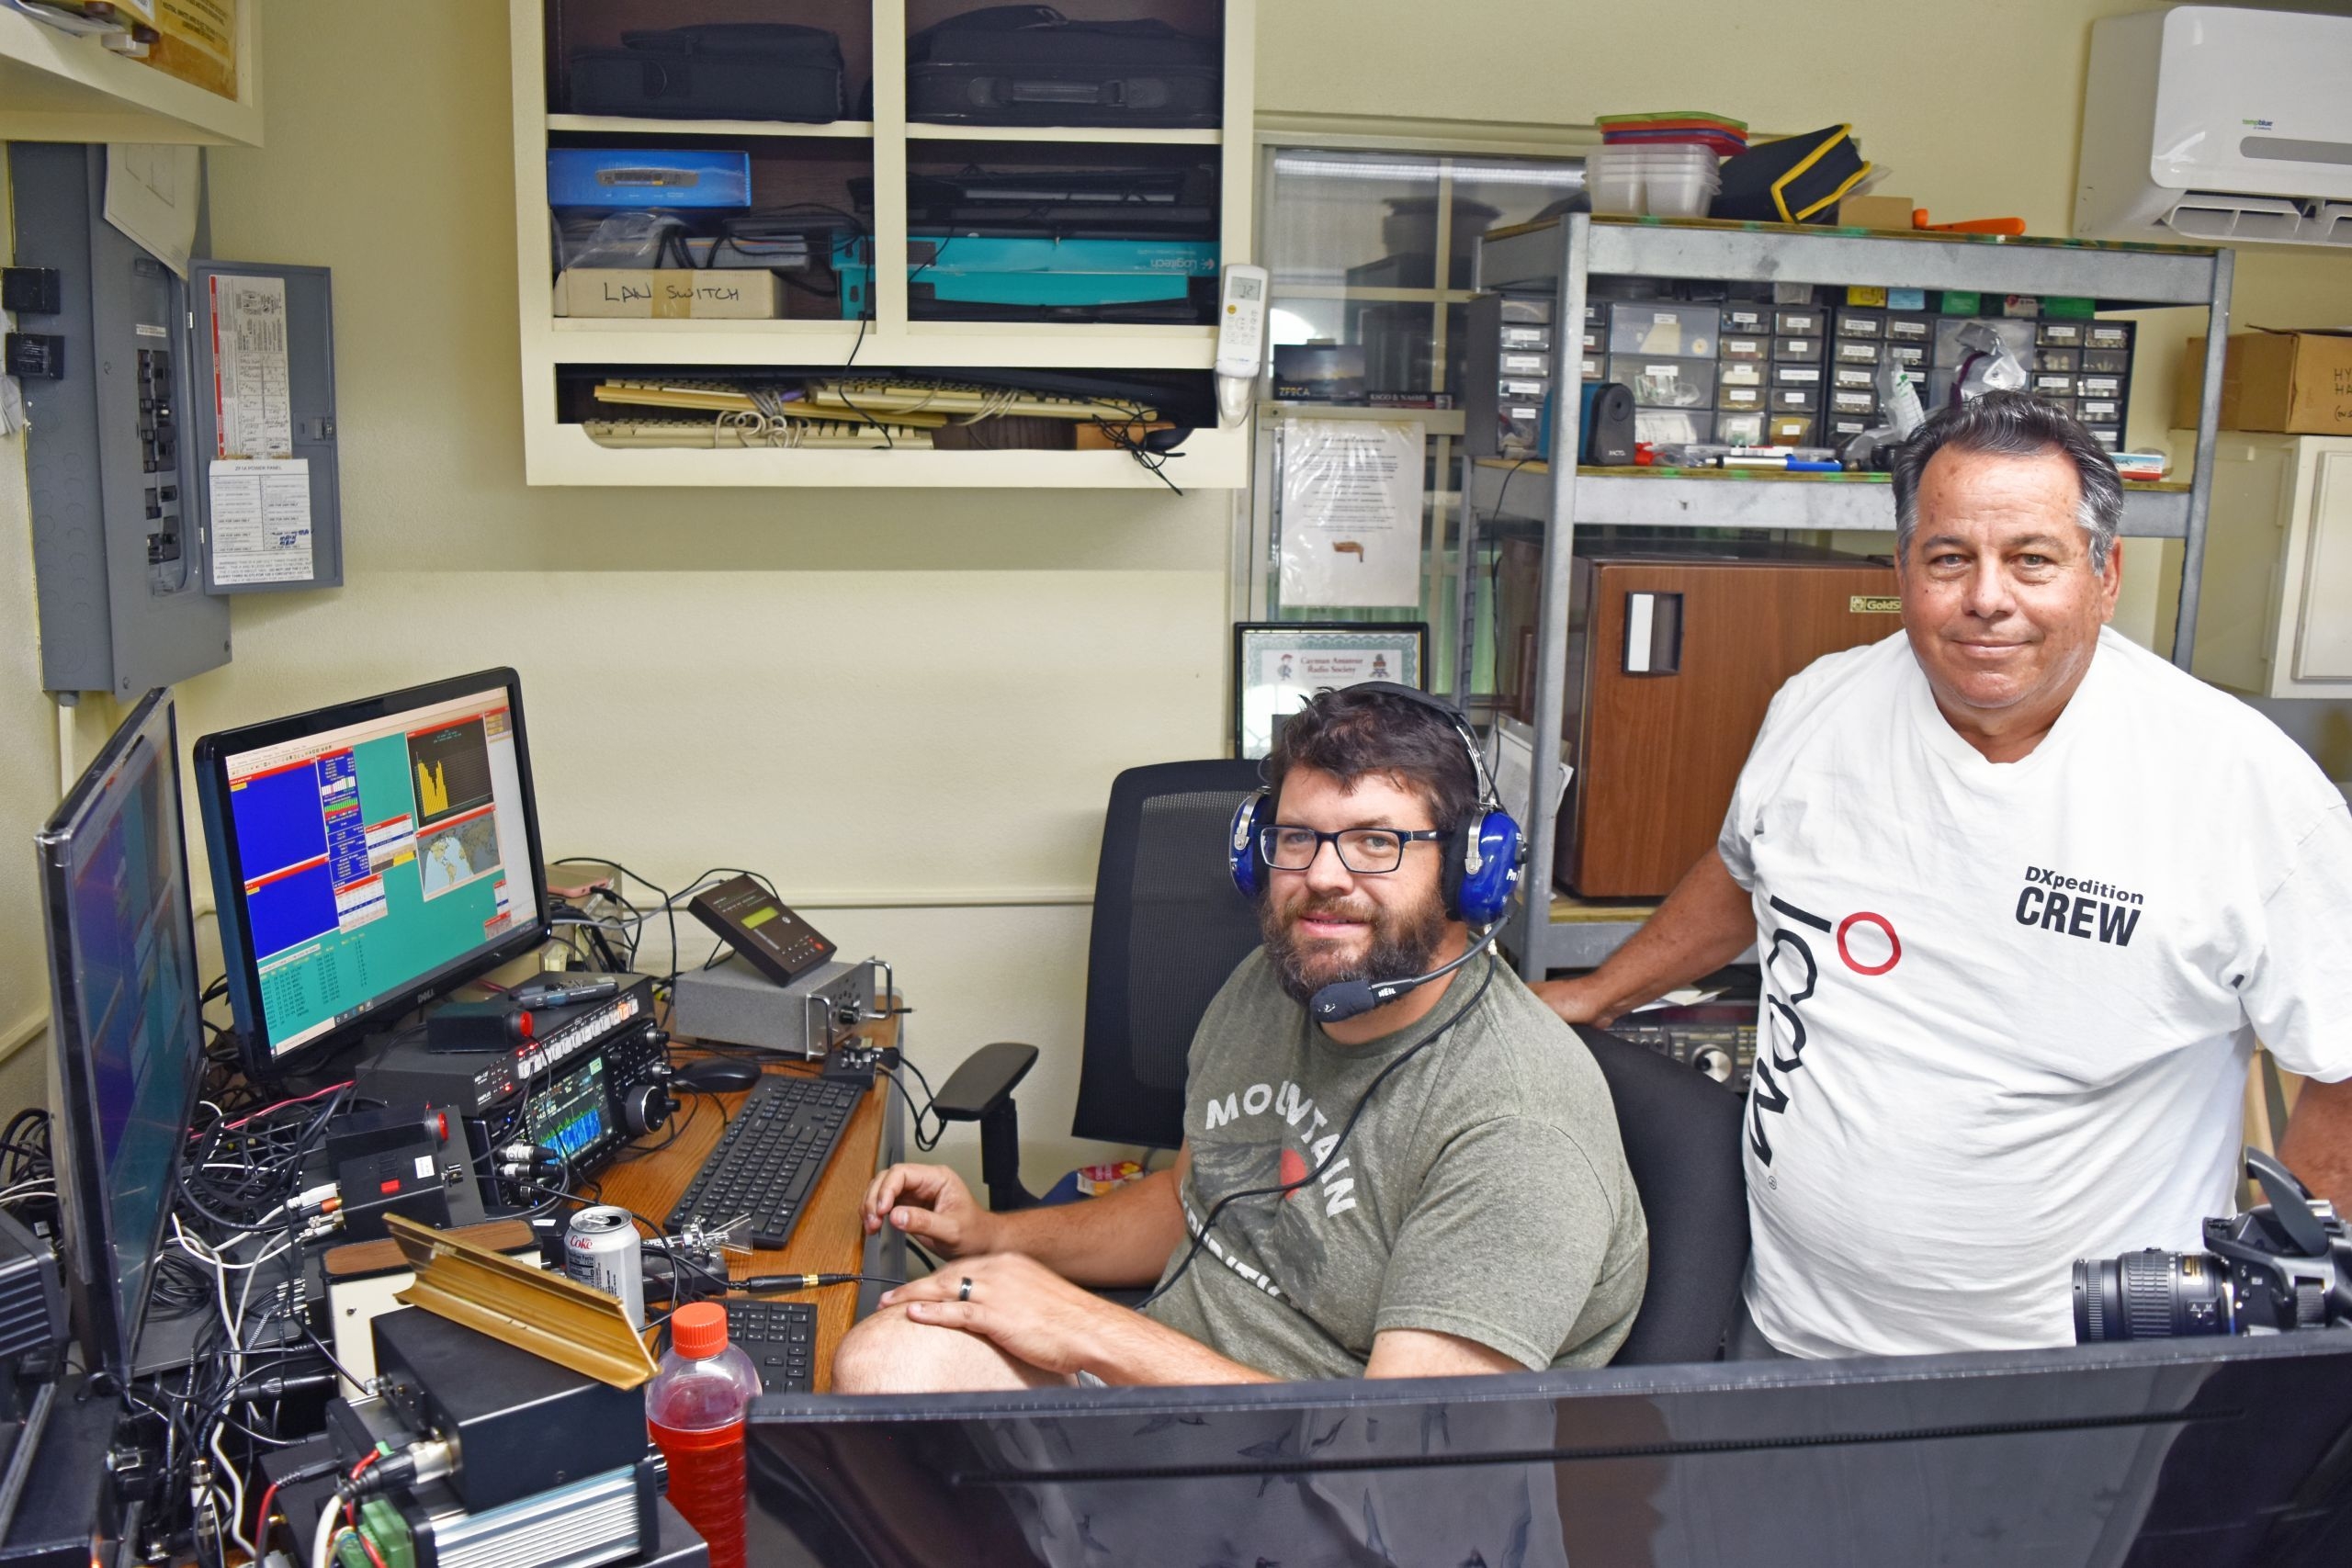 Ham Radio Operators Compete For Two Days Straight - Cayman